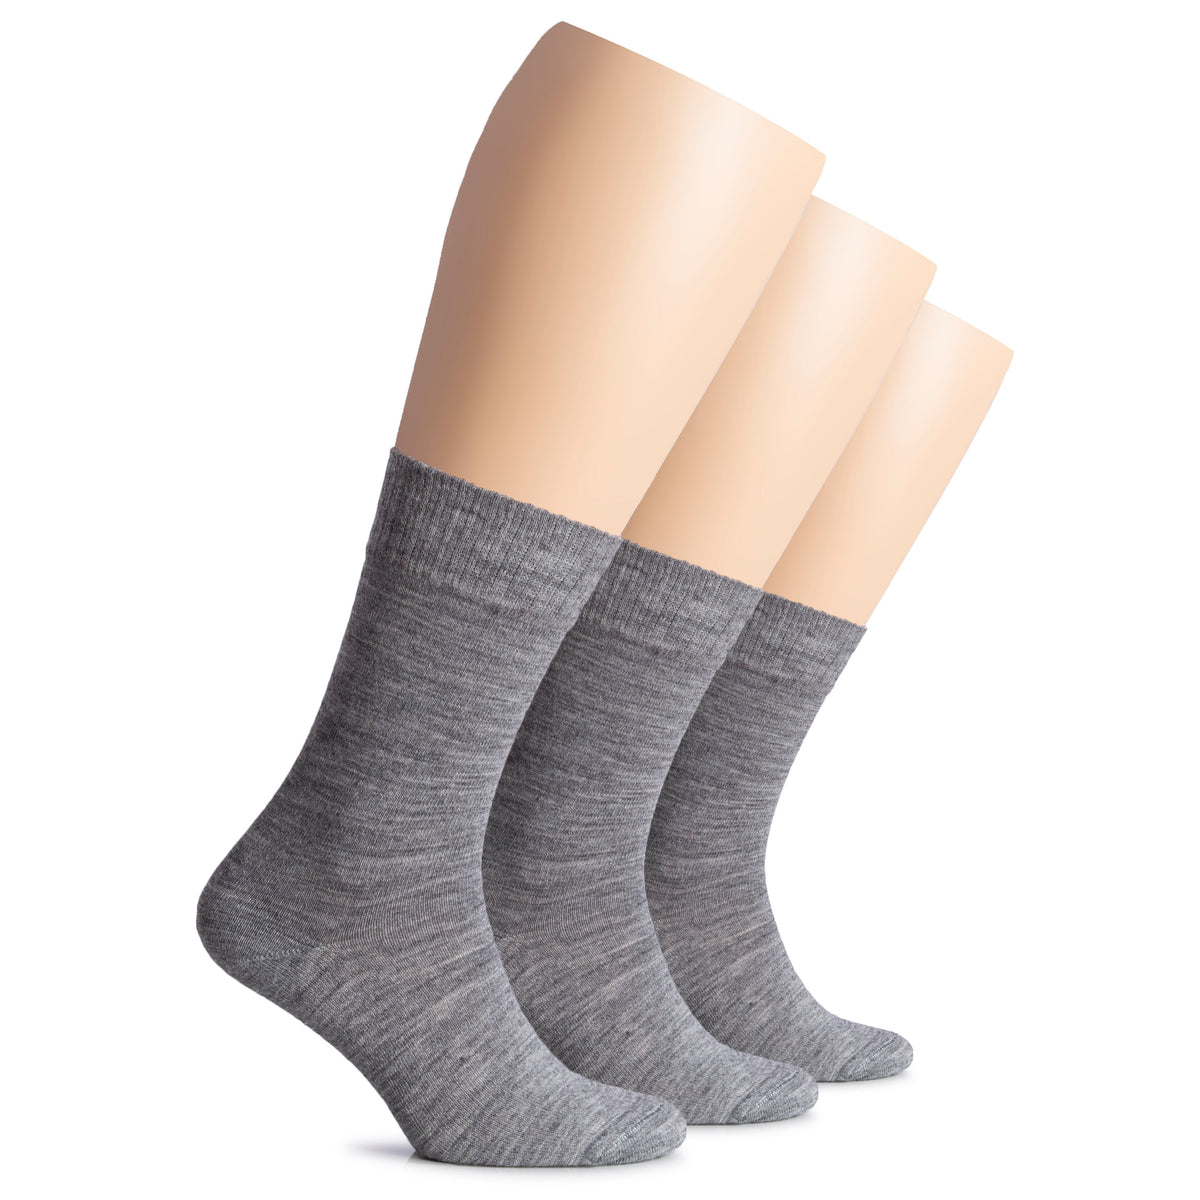 These men's socks come in a sophisticated grey hue and are made of cozy wool material for ultimate comfort.